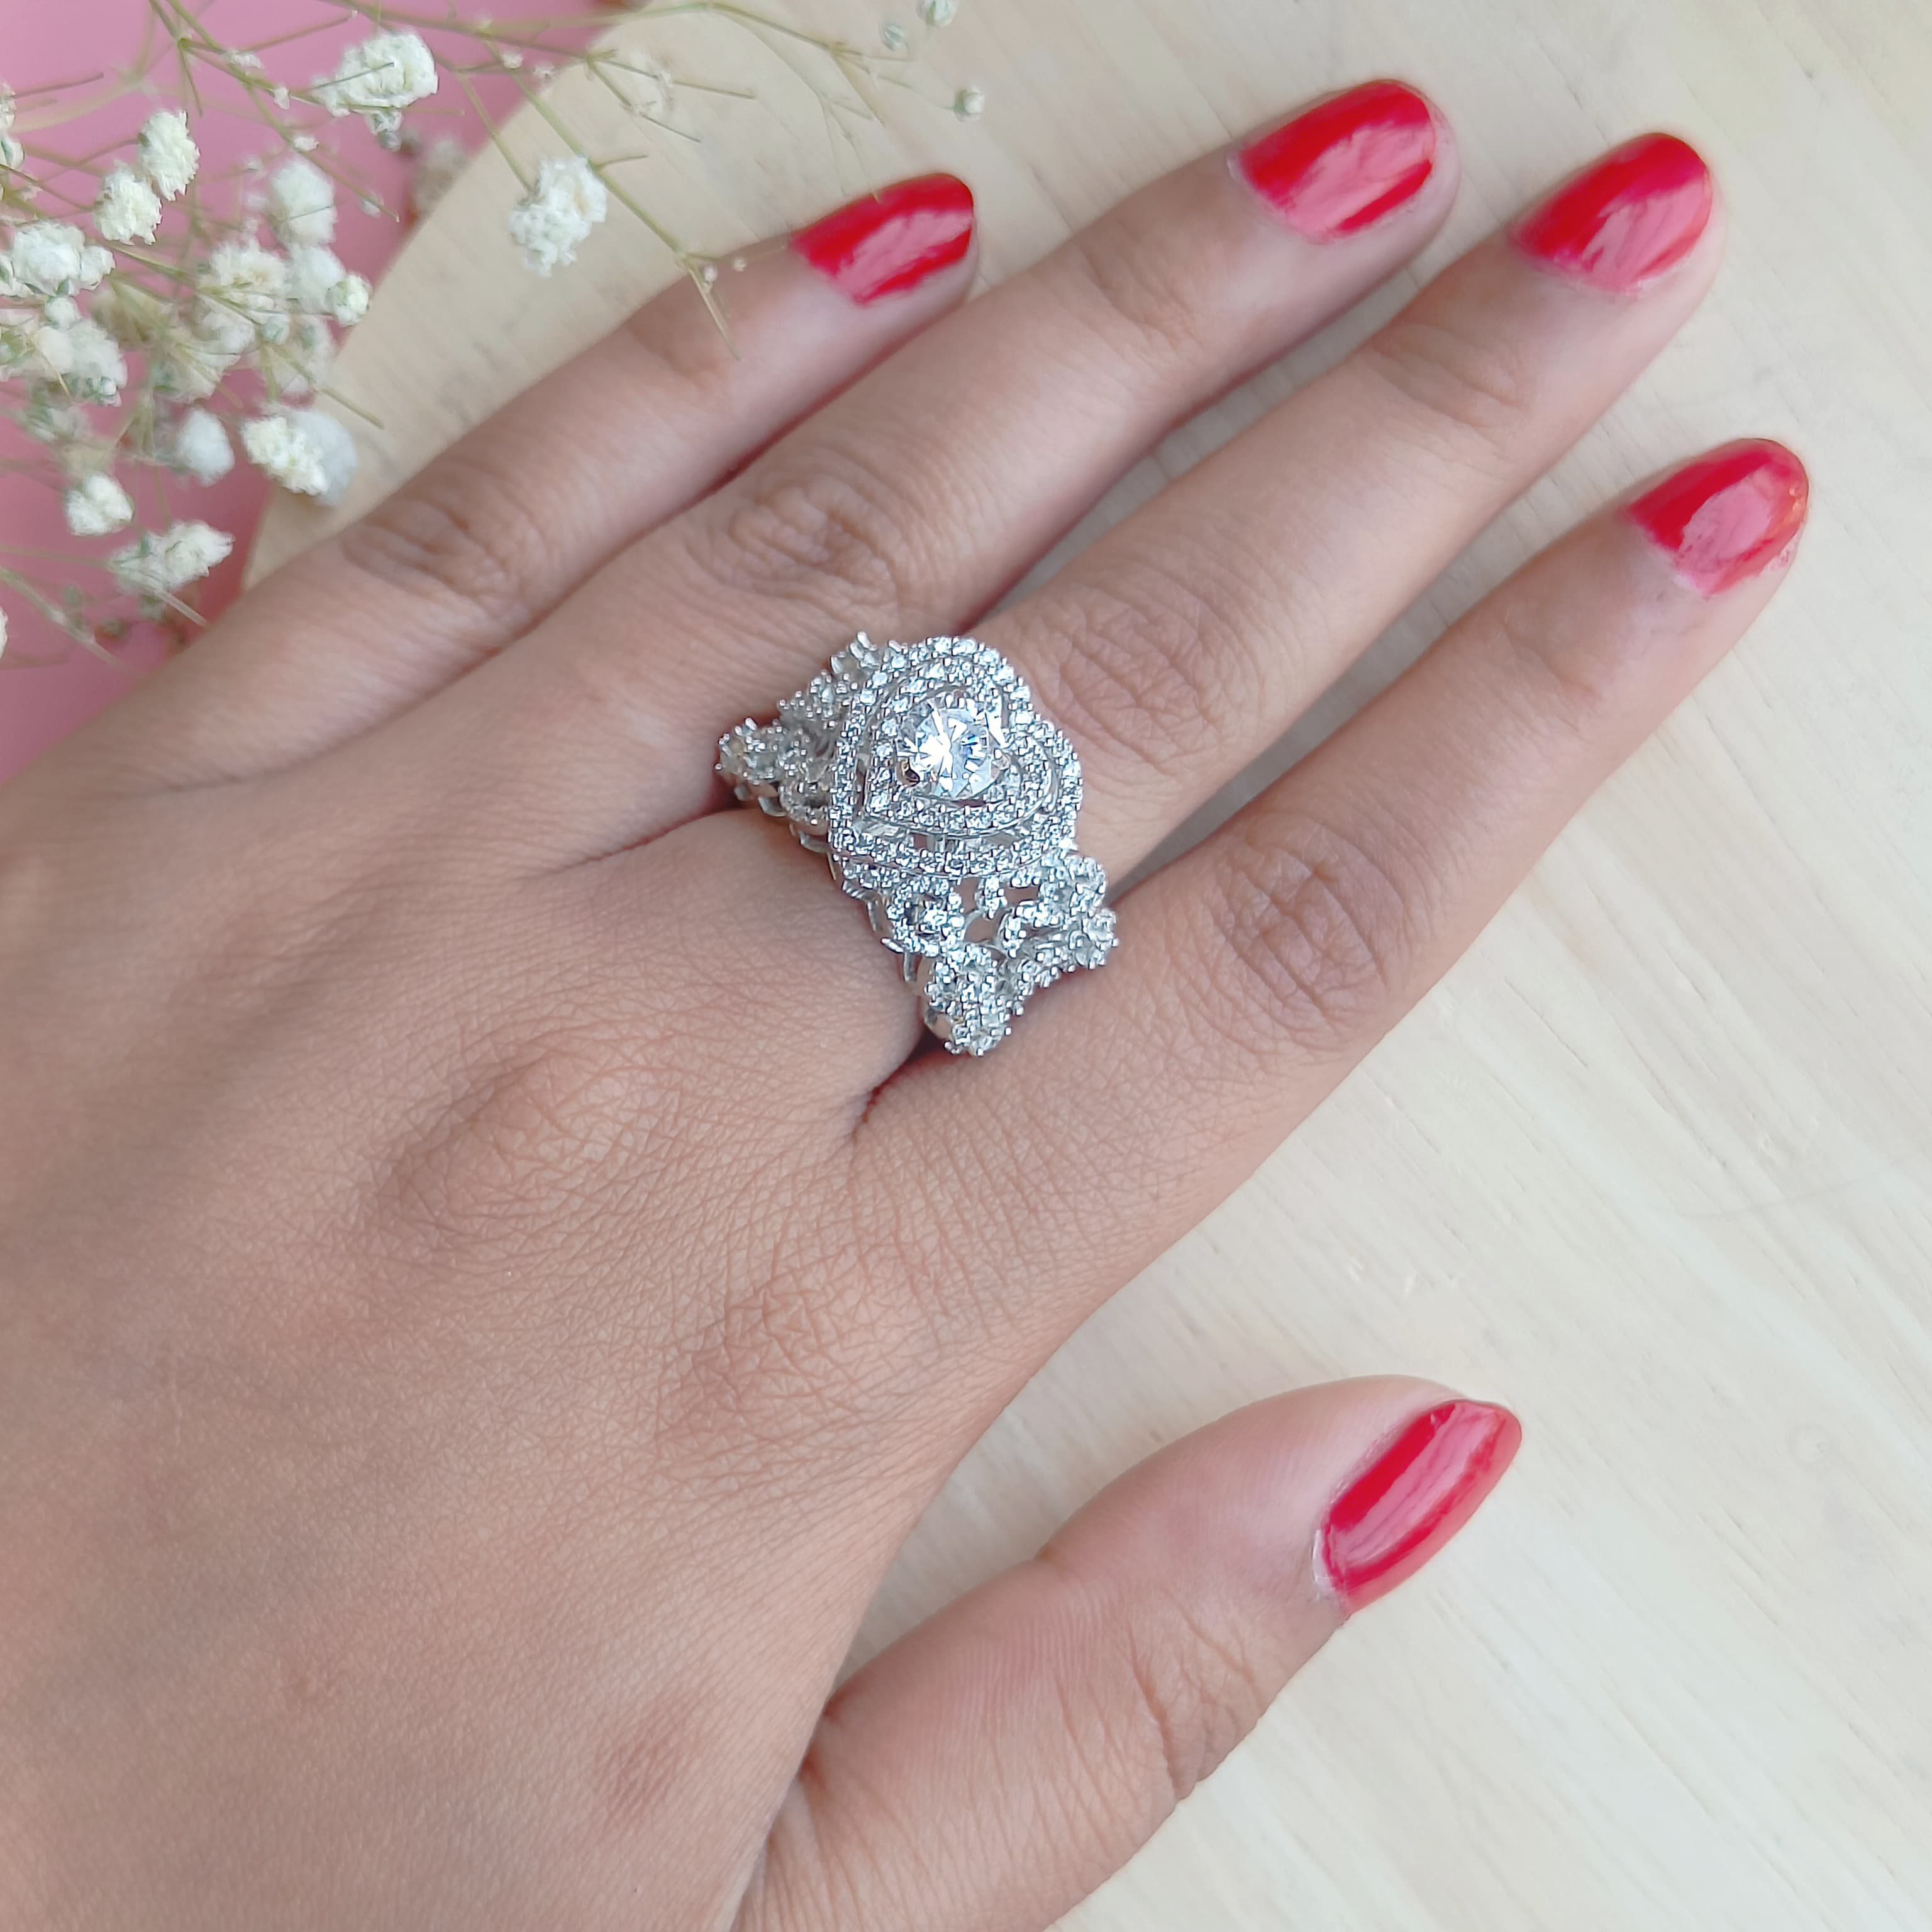 Vs sterling silver Cocktail Ring-160